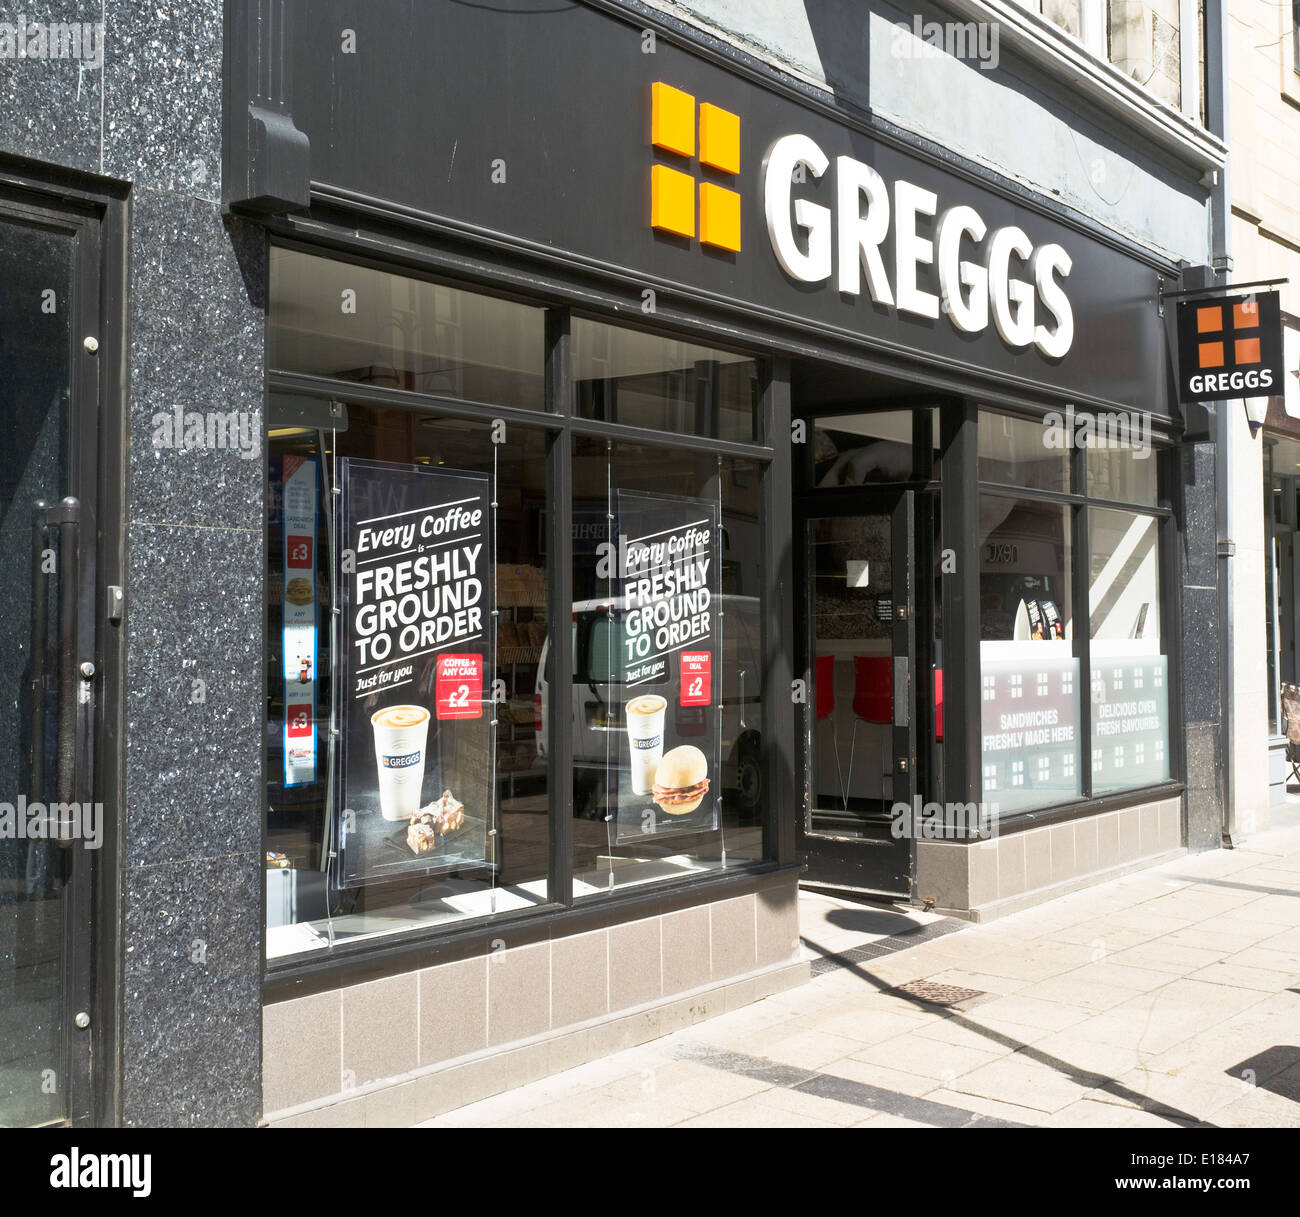 dh Bakers shop BAKER UK Greggs bakers shop front bakery store takeaway outlet Stock Photo